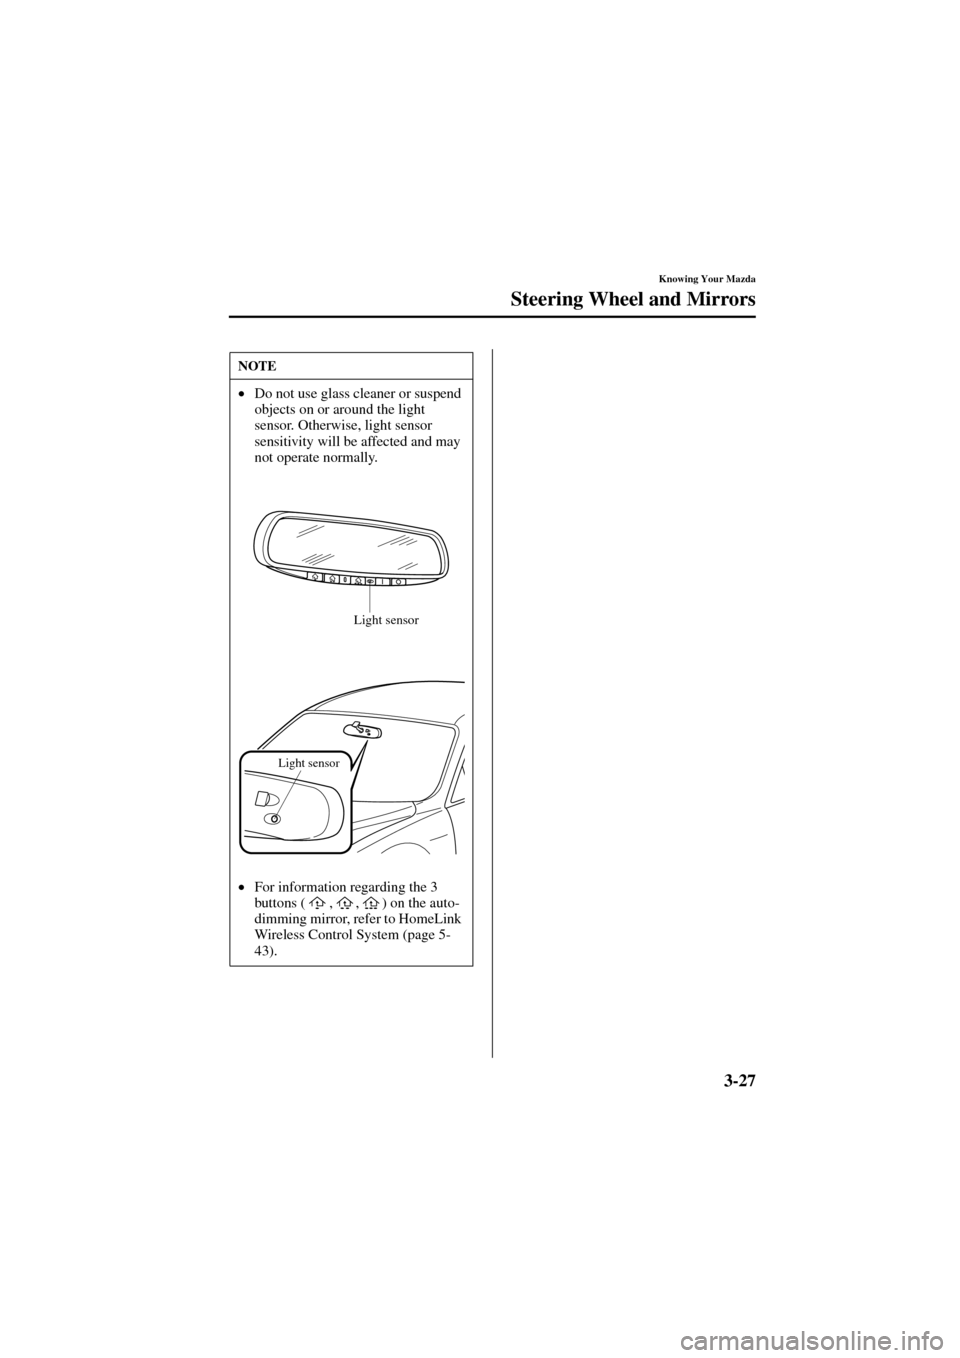 MAZDA MODEL 6 2004   (in English) Manual Online 3-27
Knowing Your Mazda
Steering Wheel and Mirrors
Form No. 8R29-EA-02I
NOTE
•
Do not use glass cleaner or suspend 
objects on or around the light 
sensor. Otherwise, light sensor 
sensitivity will 